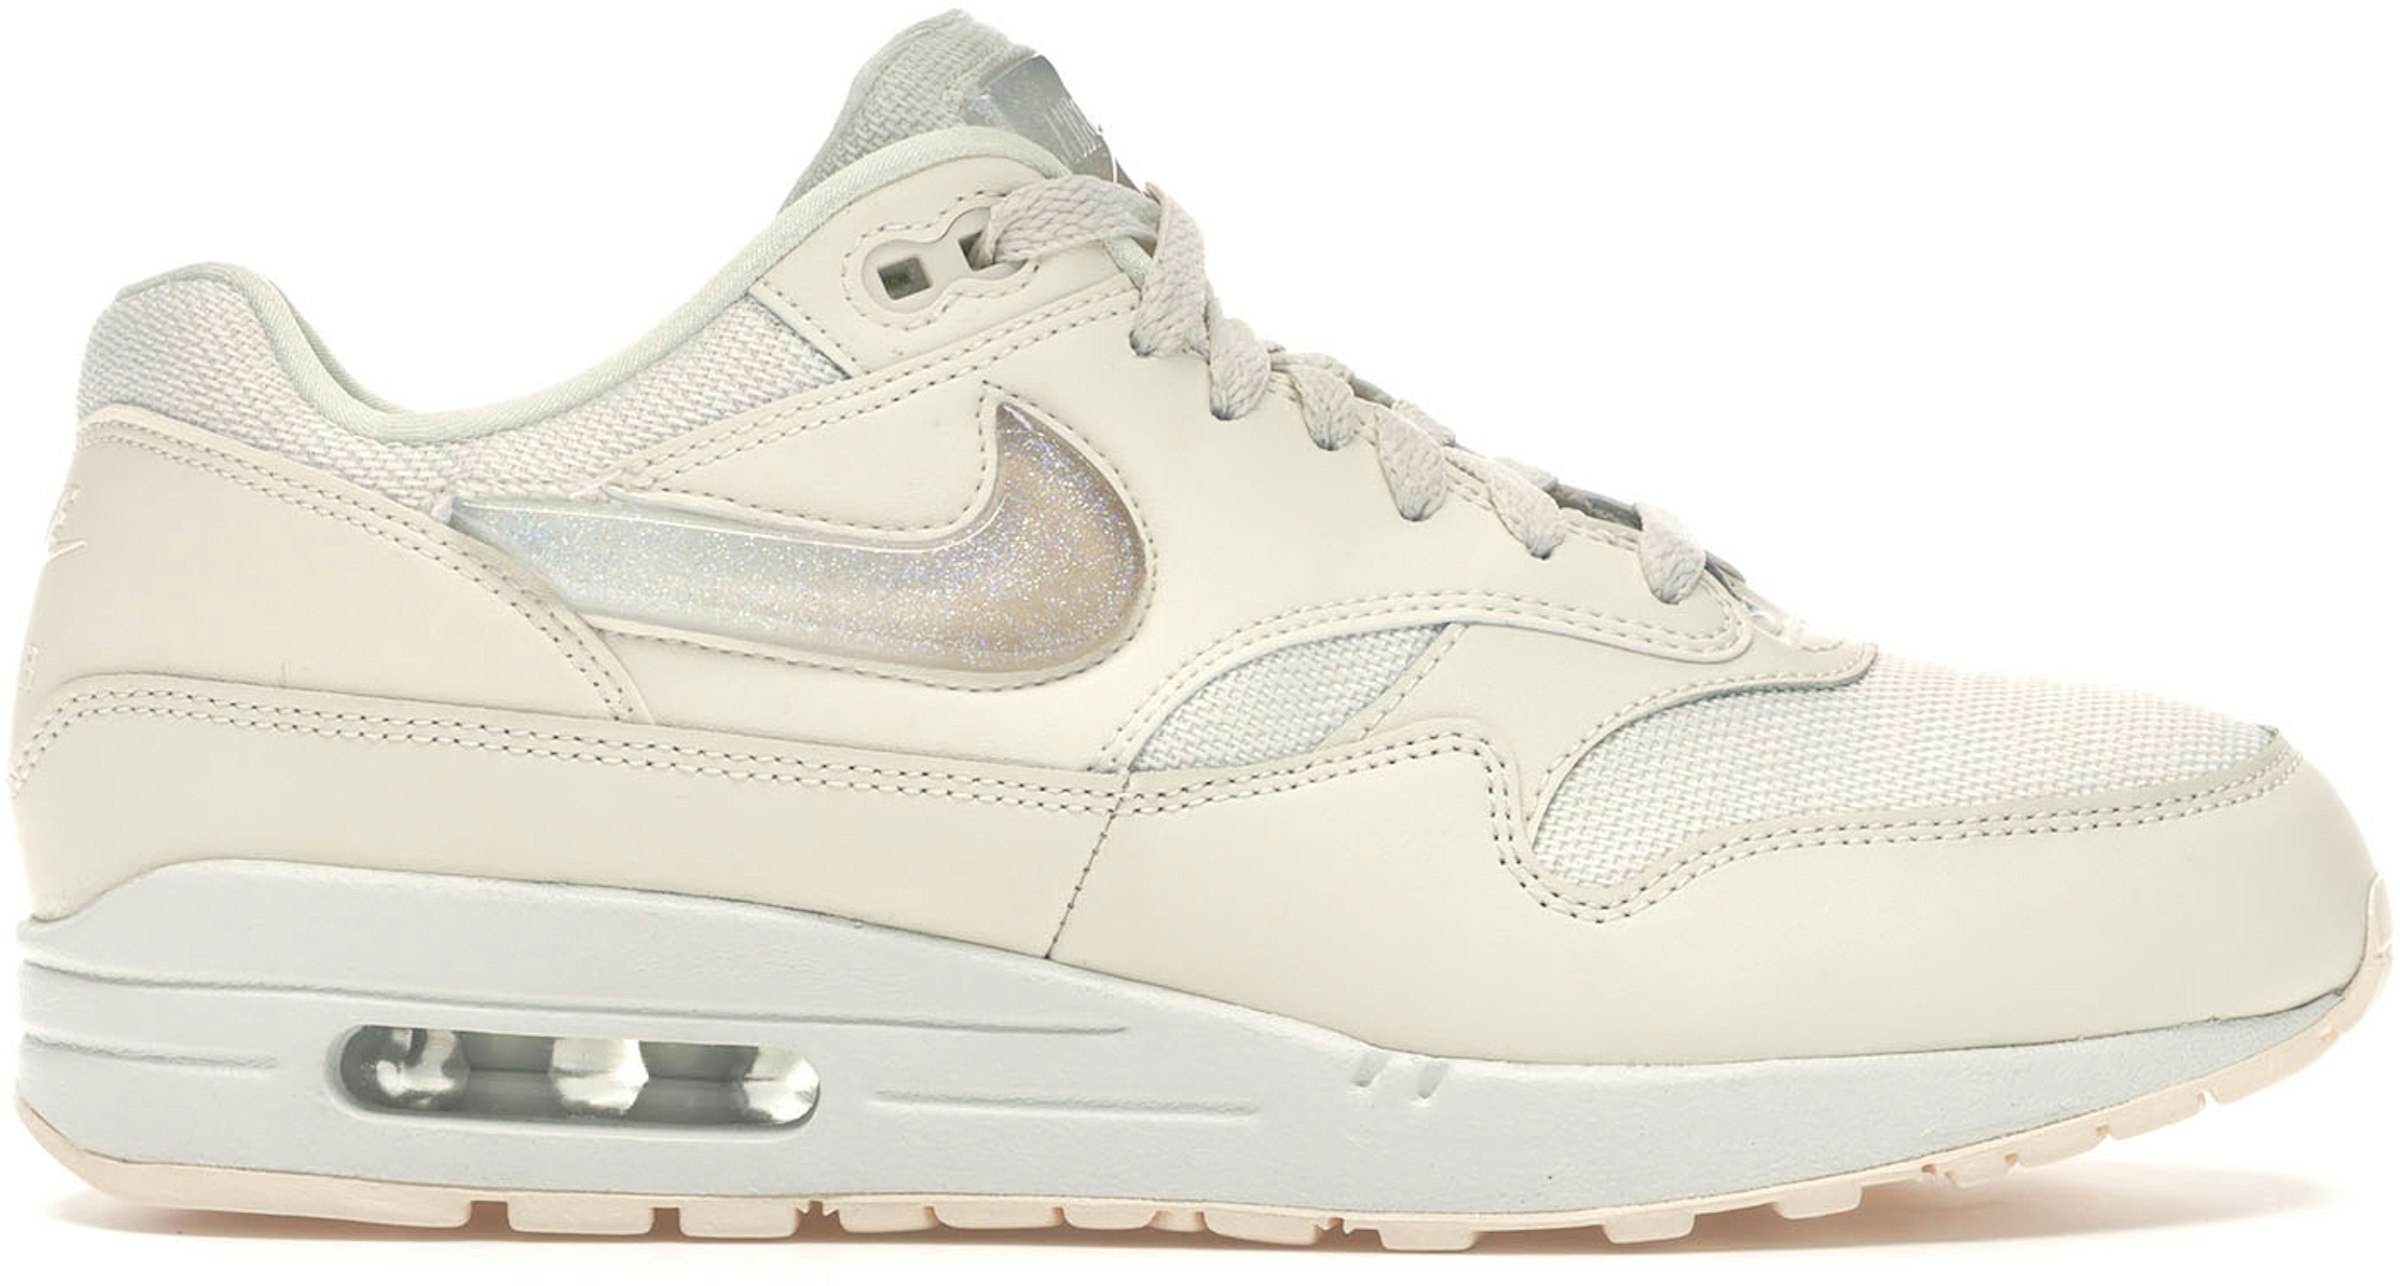 Weven wetgeving Email schrijven Nike Air Max 1 Jelly Puff Pale Ivory (Women's) - AT5248-100 - US